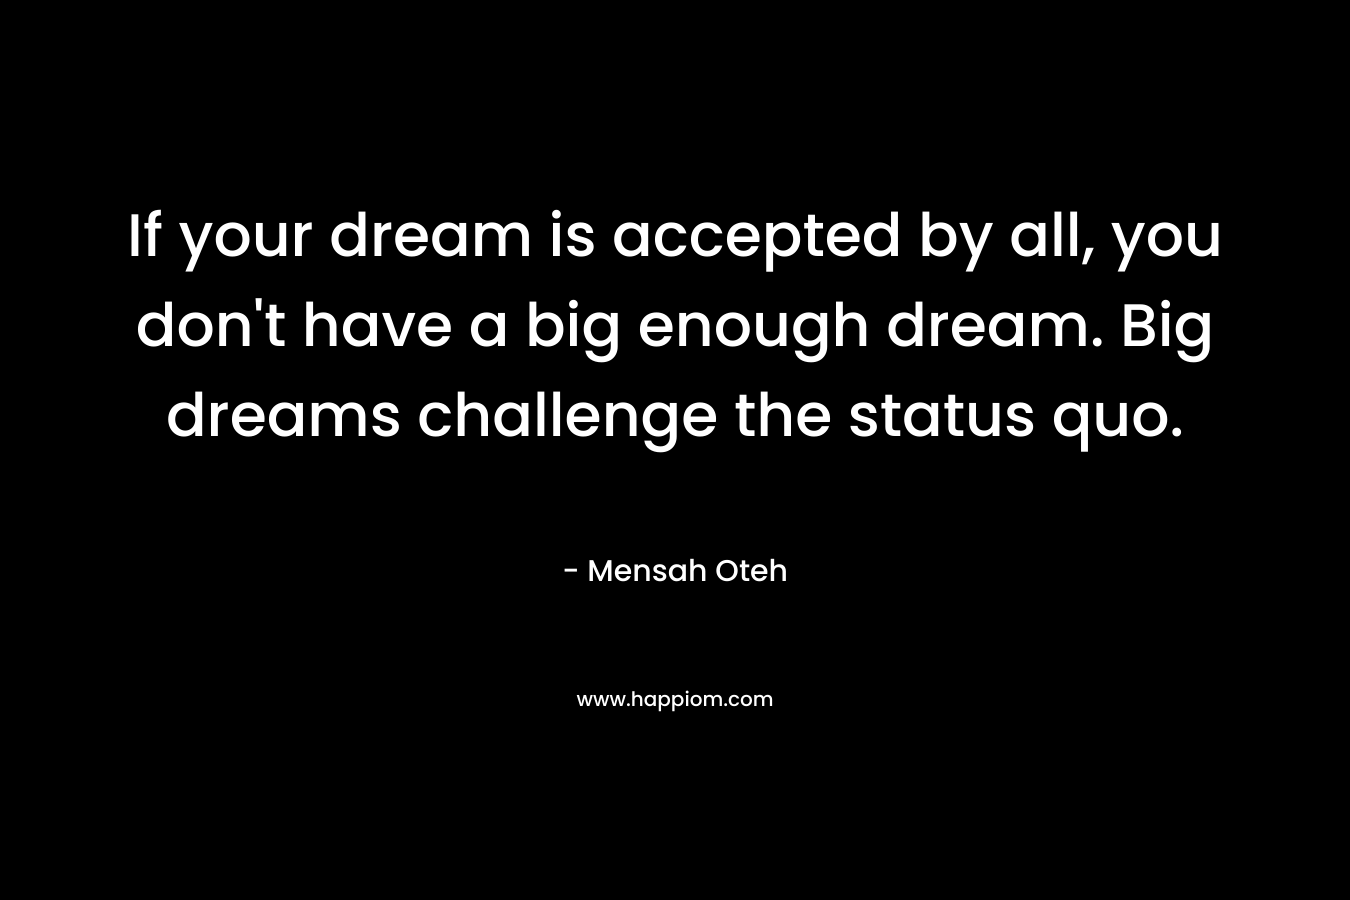 If your dream is accepted by all, you don't have a big enough dream. Big dreams challenge the status quo.